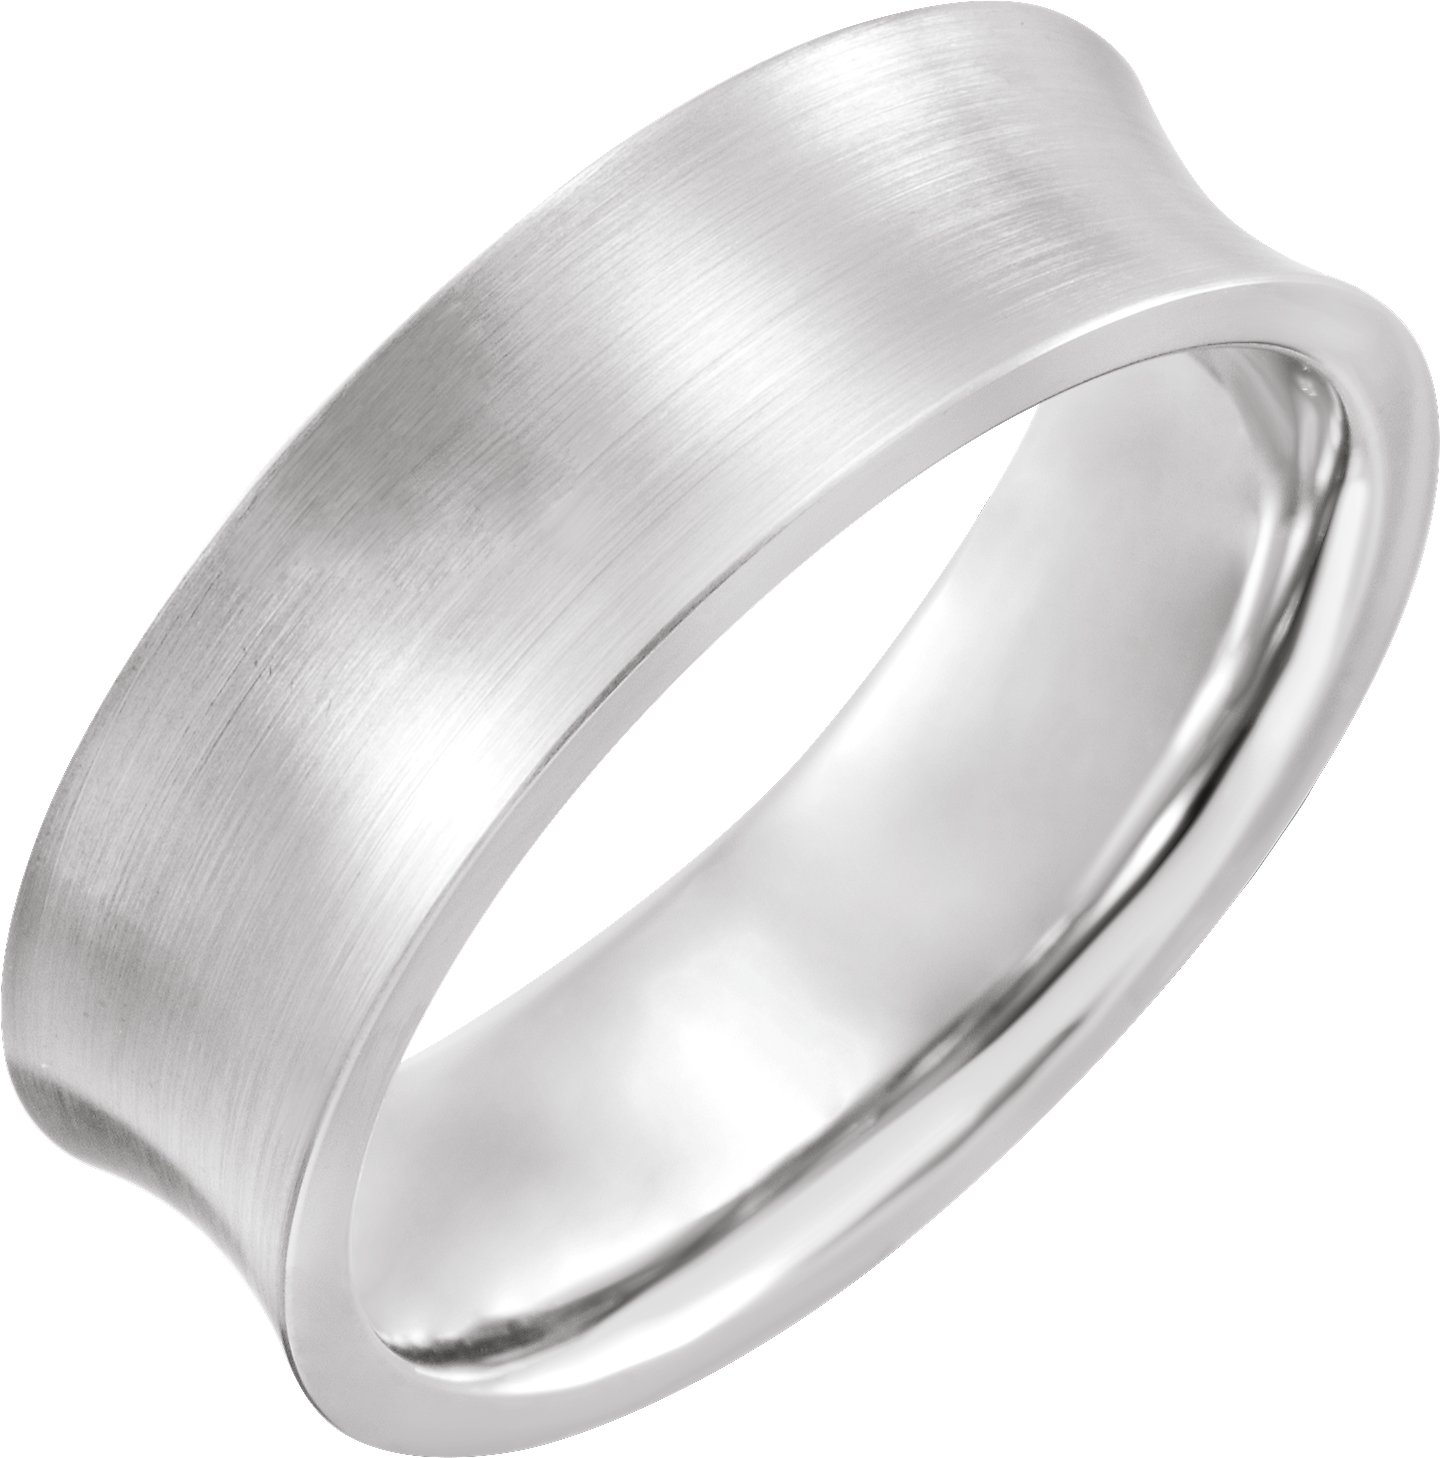 Sterling Silver 7 mm Concave Edge Band with Satin Finish Size 16 Ref 16438746